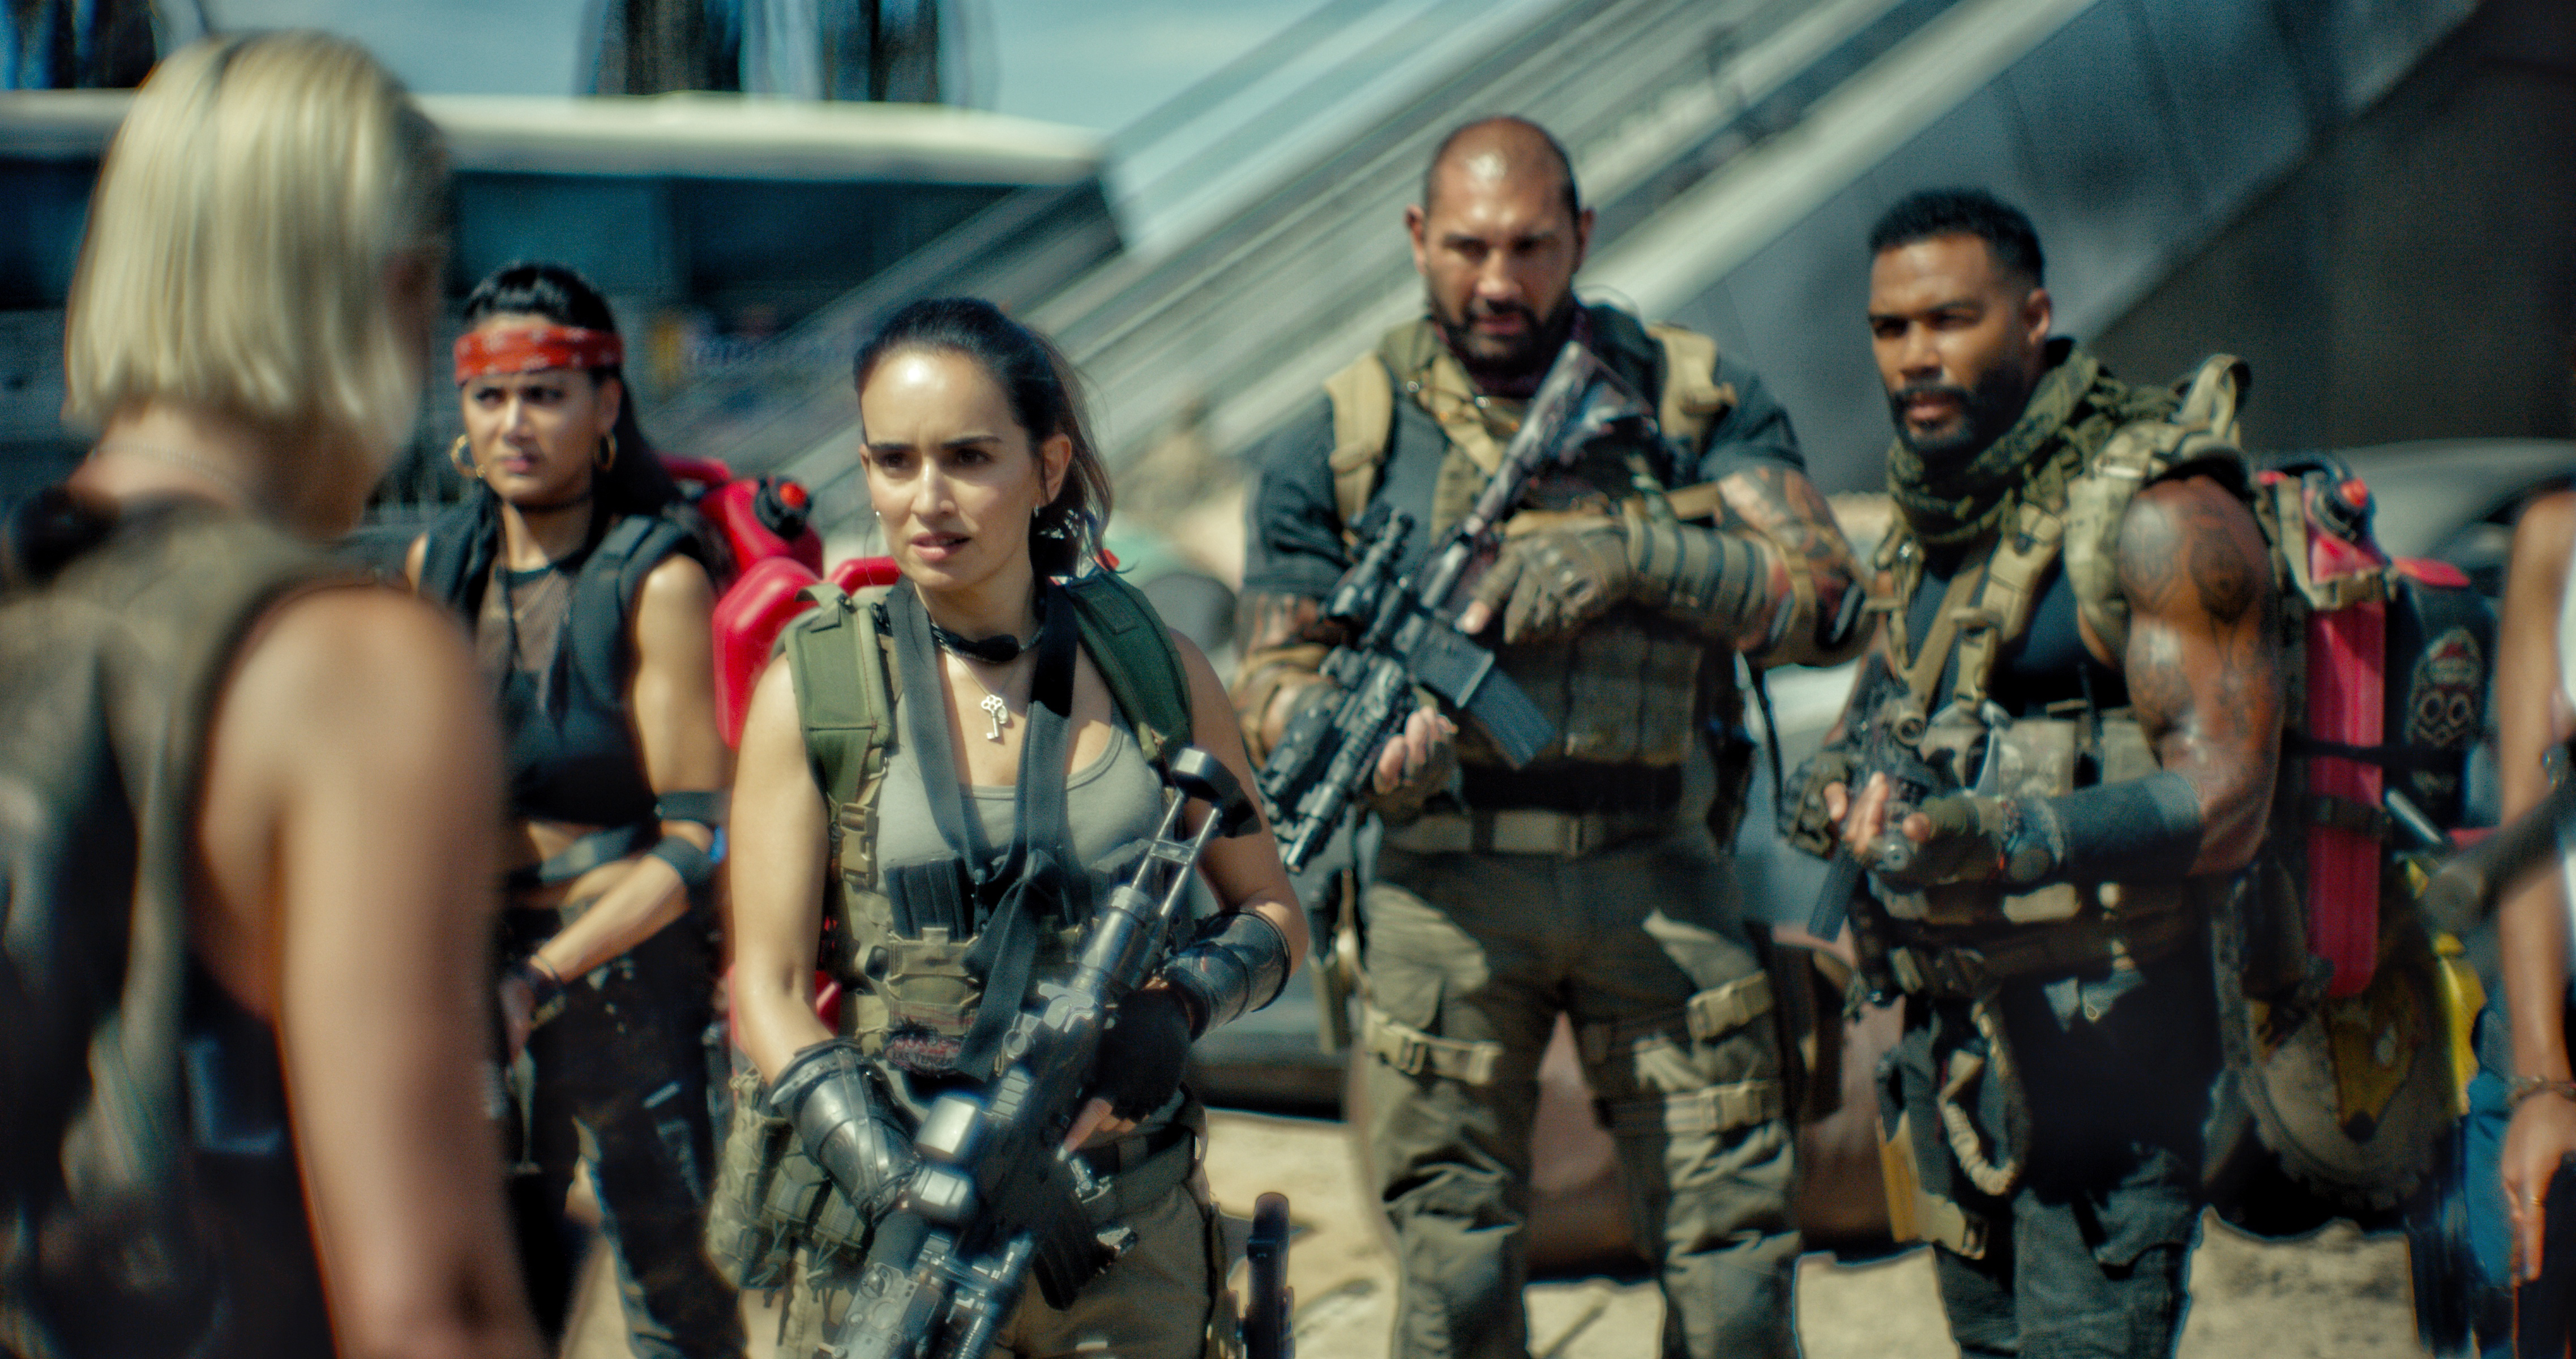 Watch The First Trailer For Zack Snyder's 'Army of The Dead'